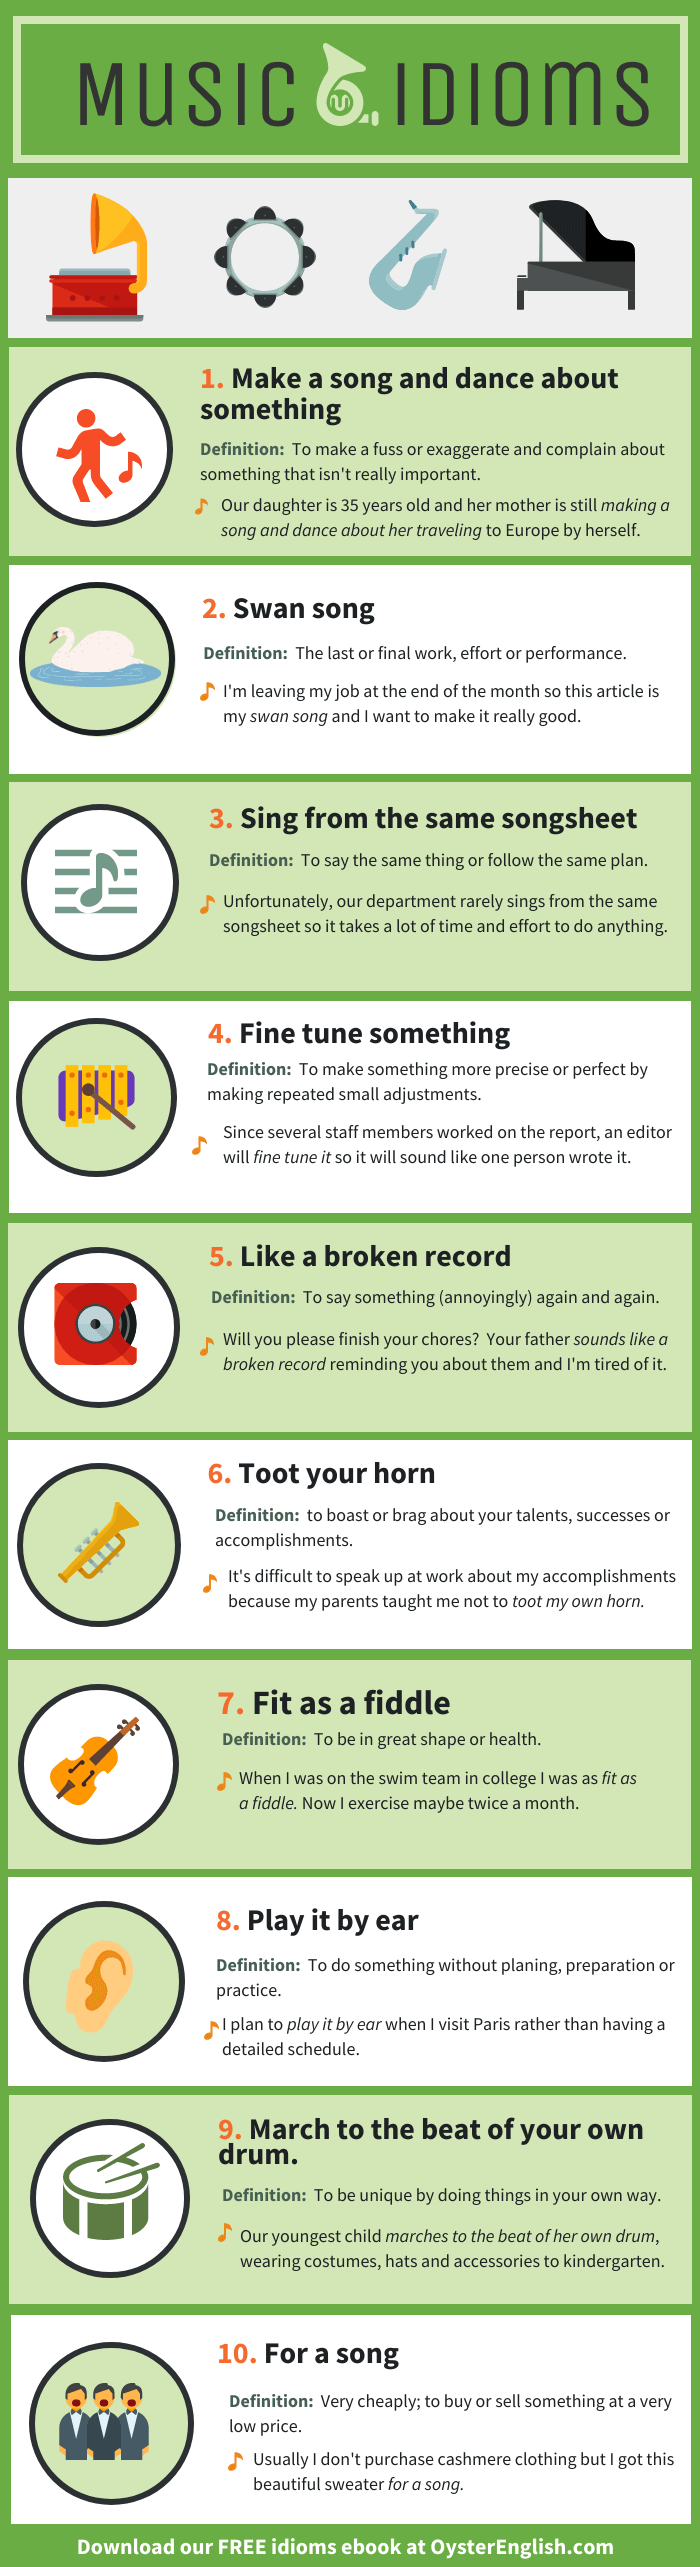 An infographic with 10 music idioms listed on this webpage with their meanings and sentence examples.